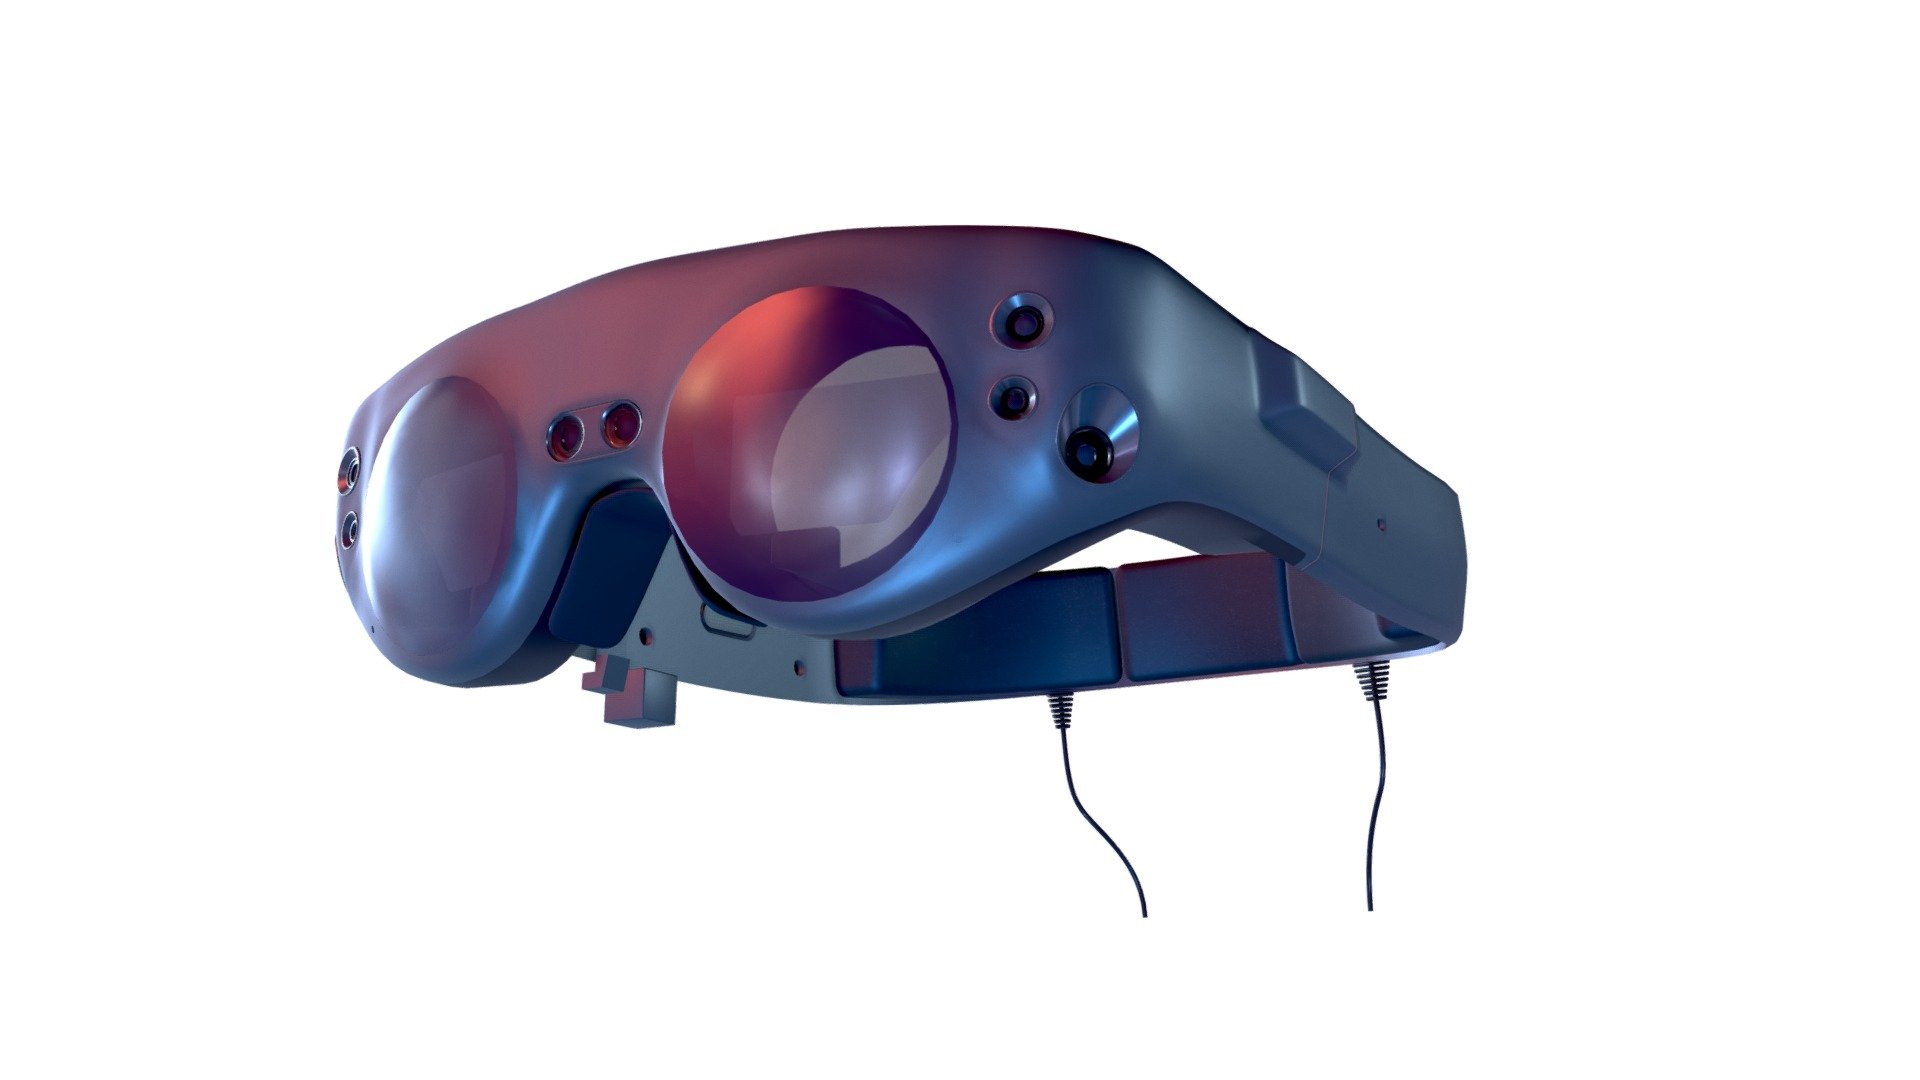 3D model of Magic Leap One creator edition, a mix reality headset is a long awaited product that became available to masses on August 8th 2018  - learn more about it here: https://www.magicleap.com/magic-leap-one

Model by shaderbytes 3d model